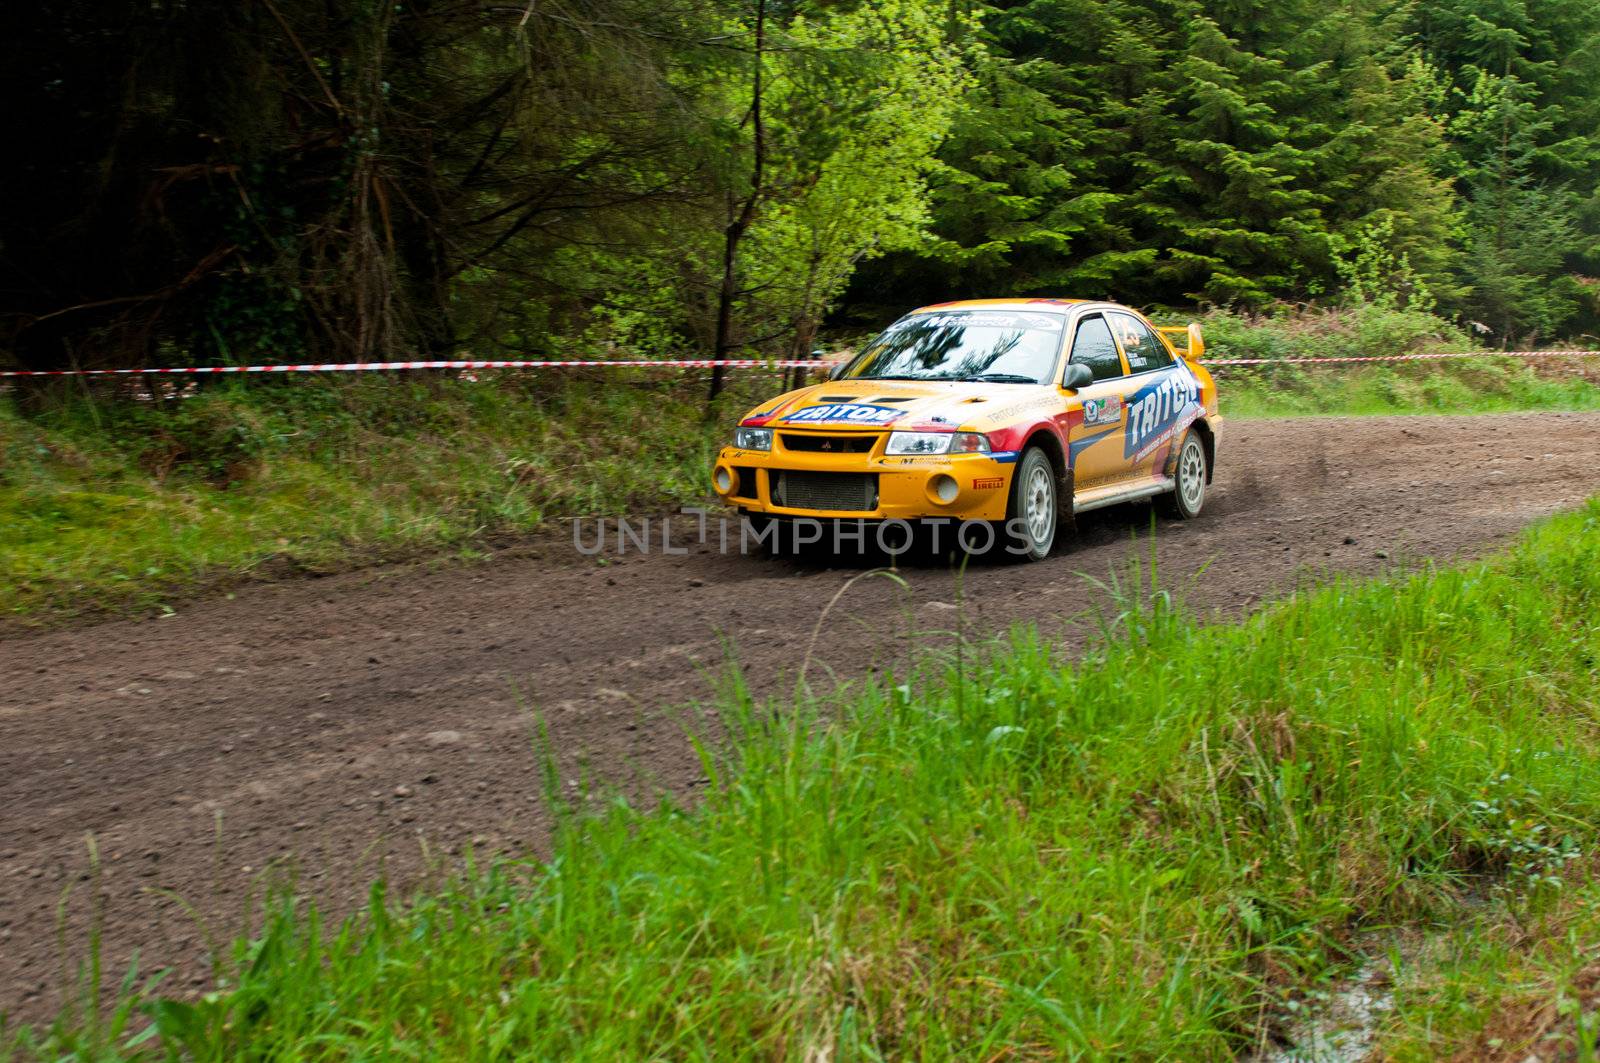 MALLOW, IRELAND - MAY 19: P. Barrett driving Mitsubishi Evo at the Jim Walsh Cork Forest Rally on May 19, 2012 in Mallow, Ireland. 4th round of the Valvoline National Forest Rally Championship.